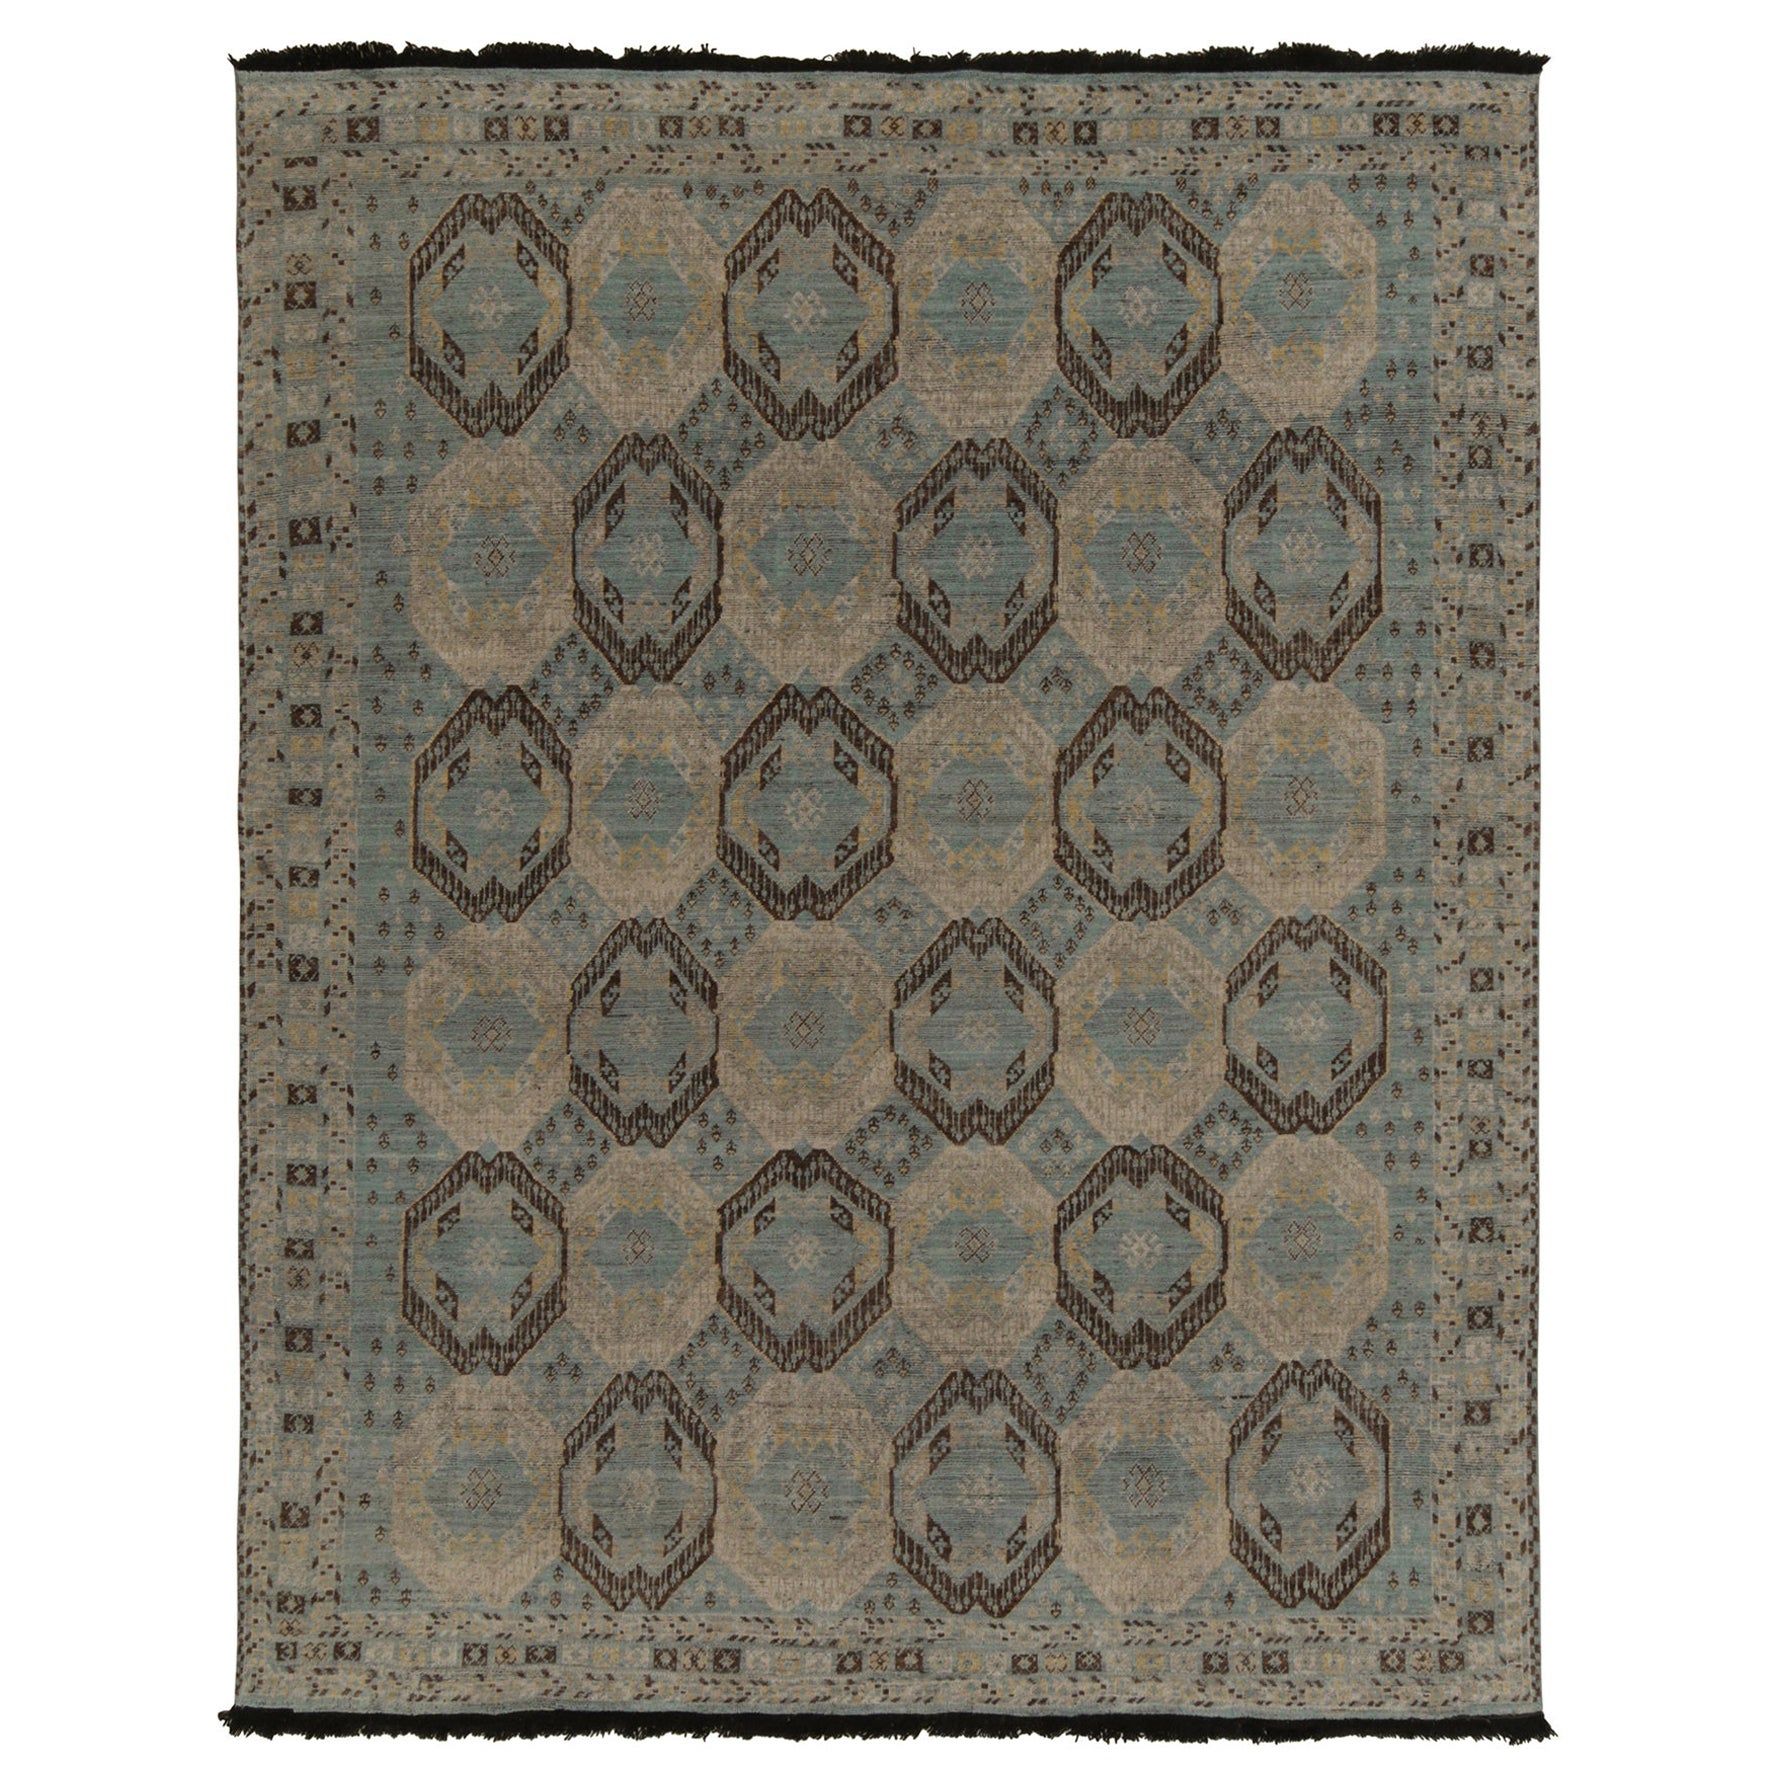 Rug & Kilim’s 19th Century Tribal Style Rug in Blue, Beige and Grey Medallions